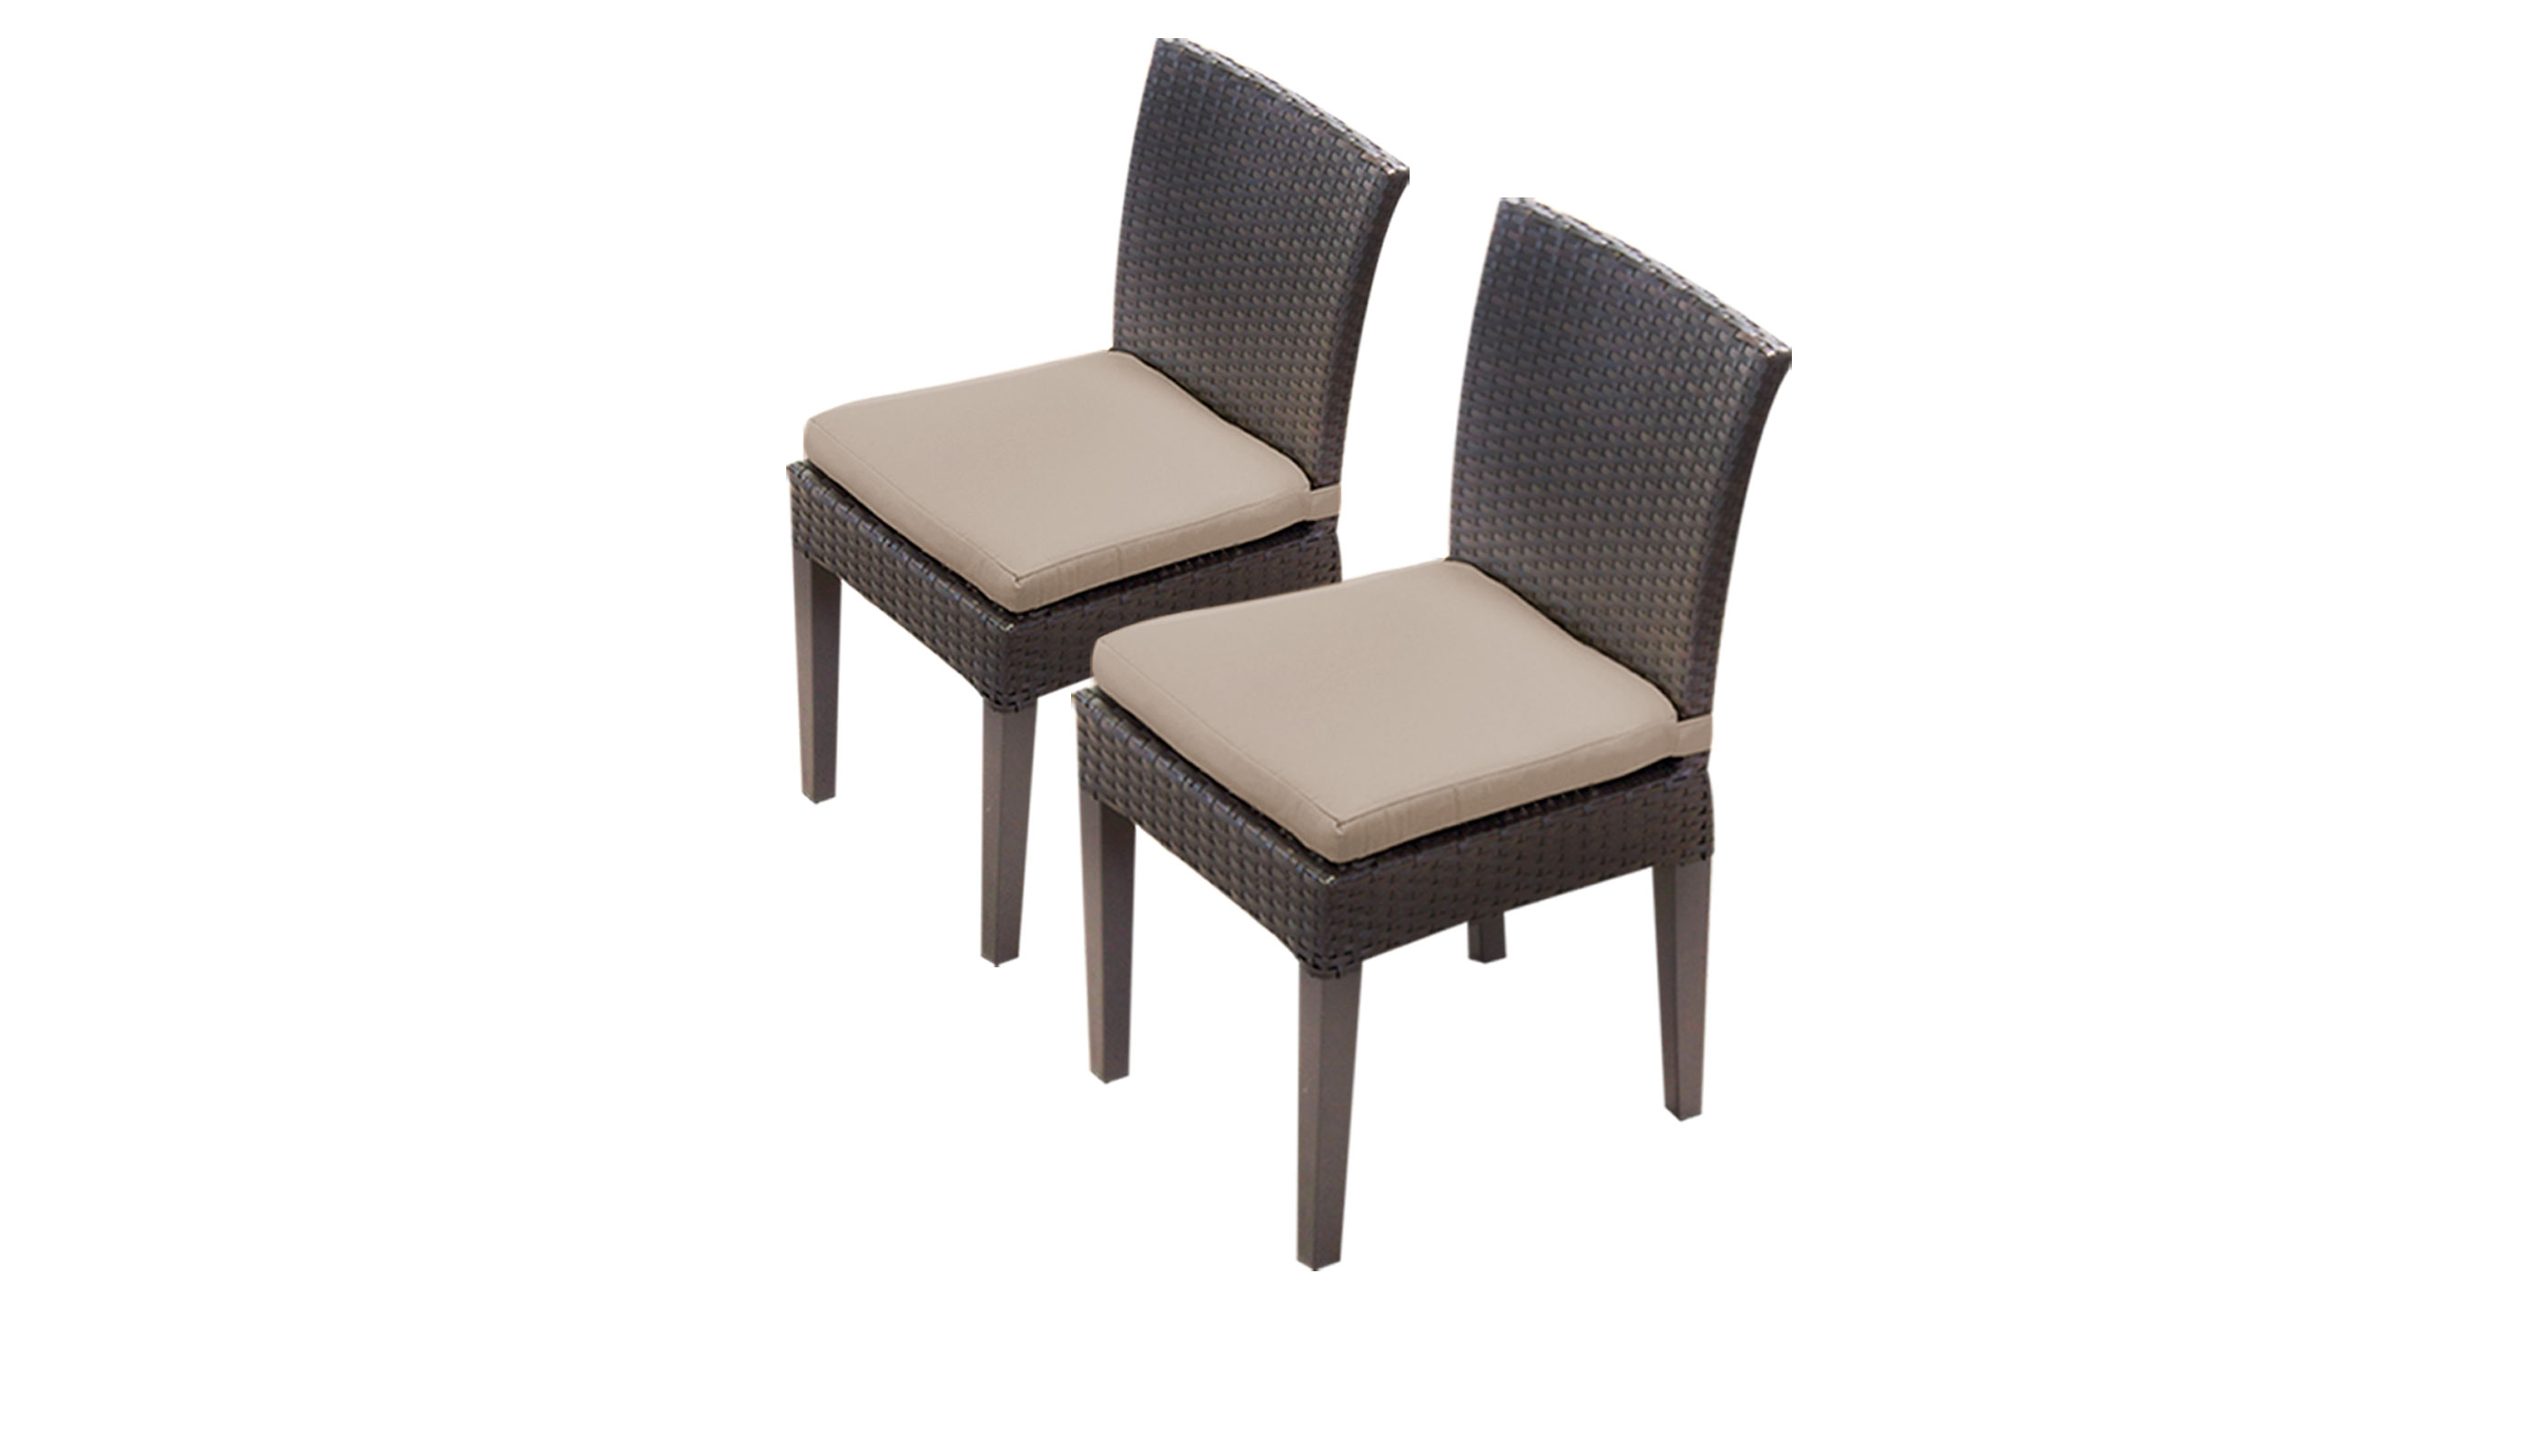 Belle Rectangular Outdoor Patio Dining Table with 2 Chairs w/ Arms and 2 Benches - TK Classics